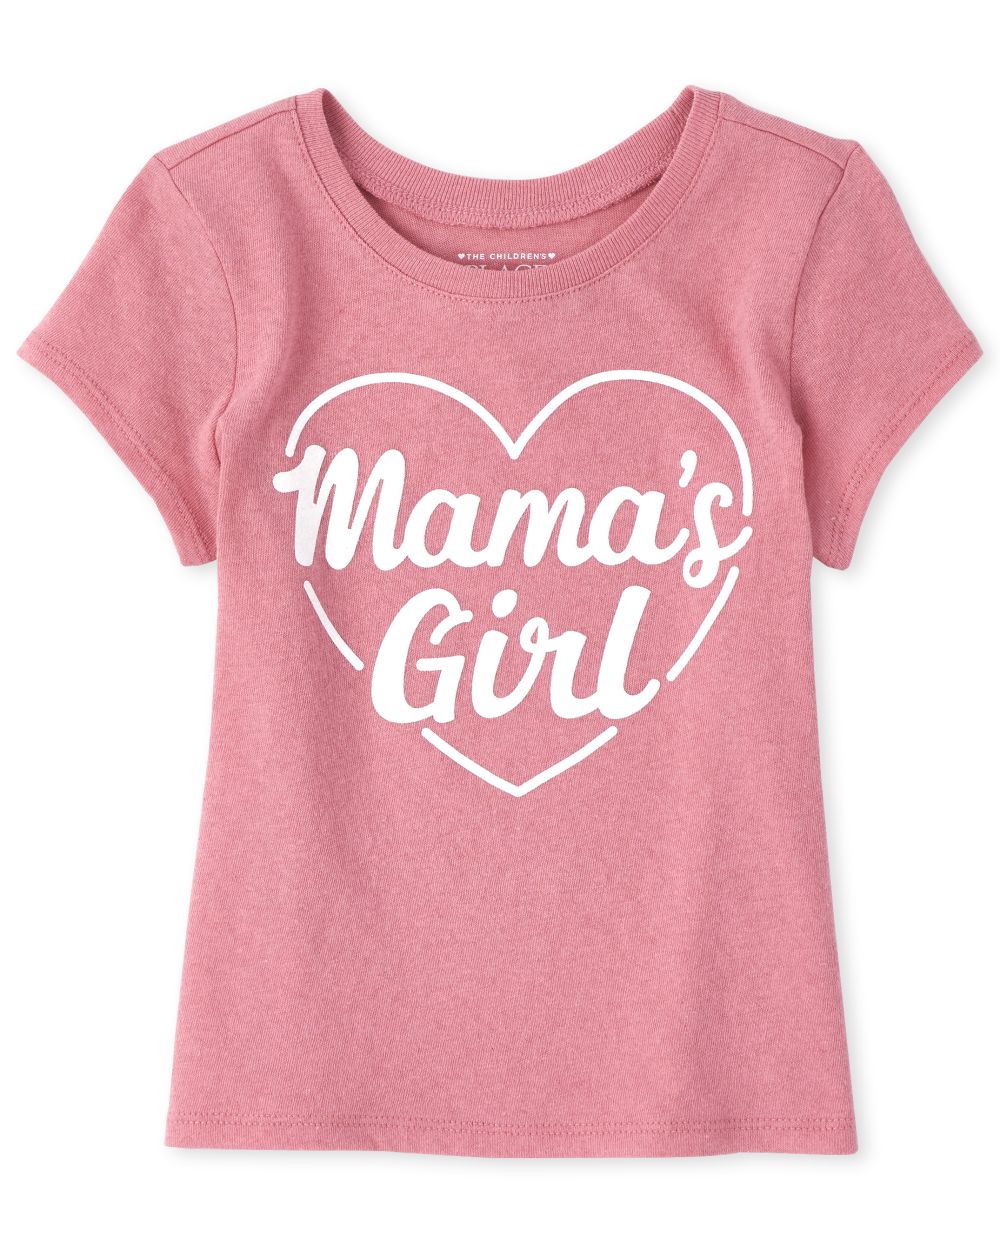 Baby And Toddler Girls Short Sleeve 'Mama's Girl' Graphic Tee